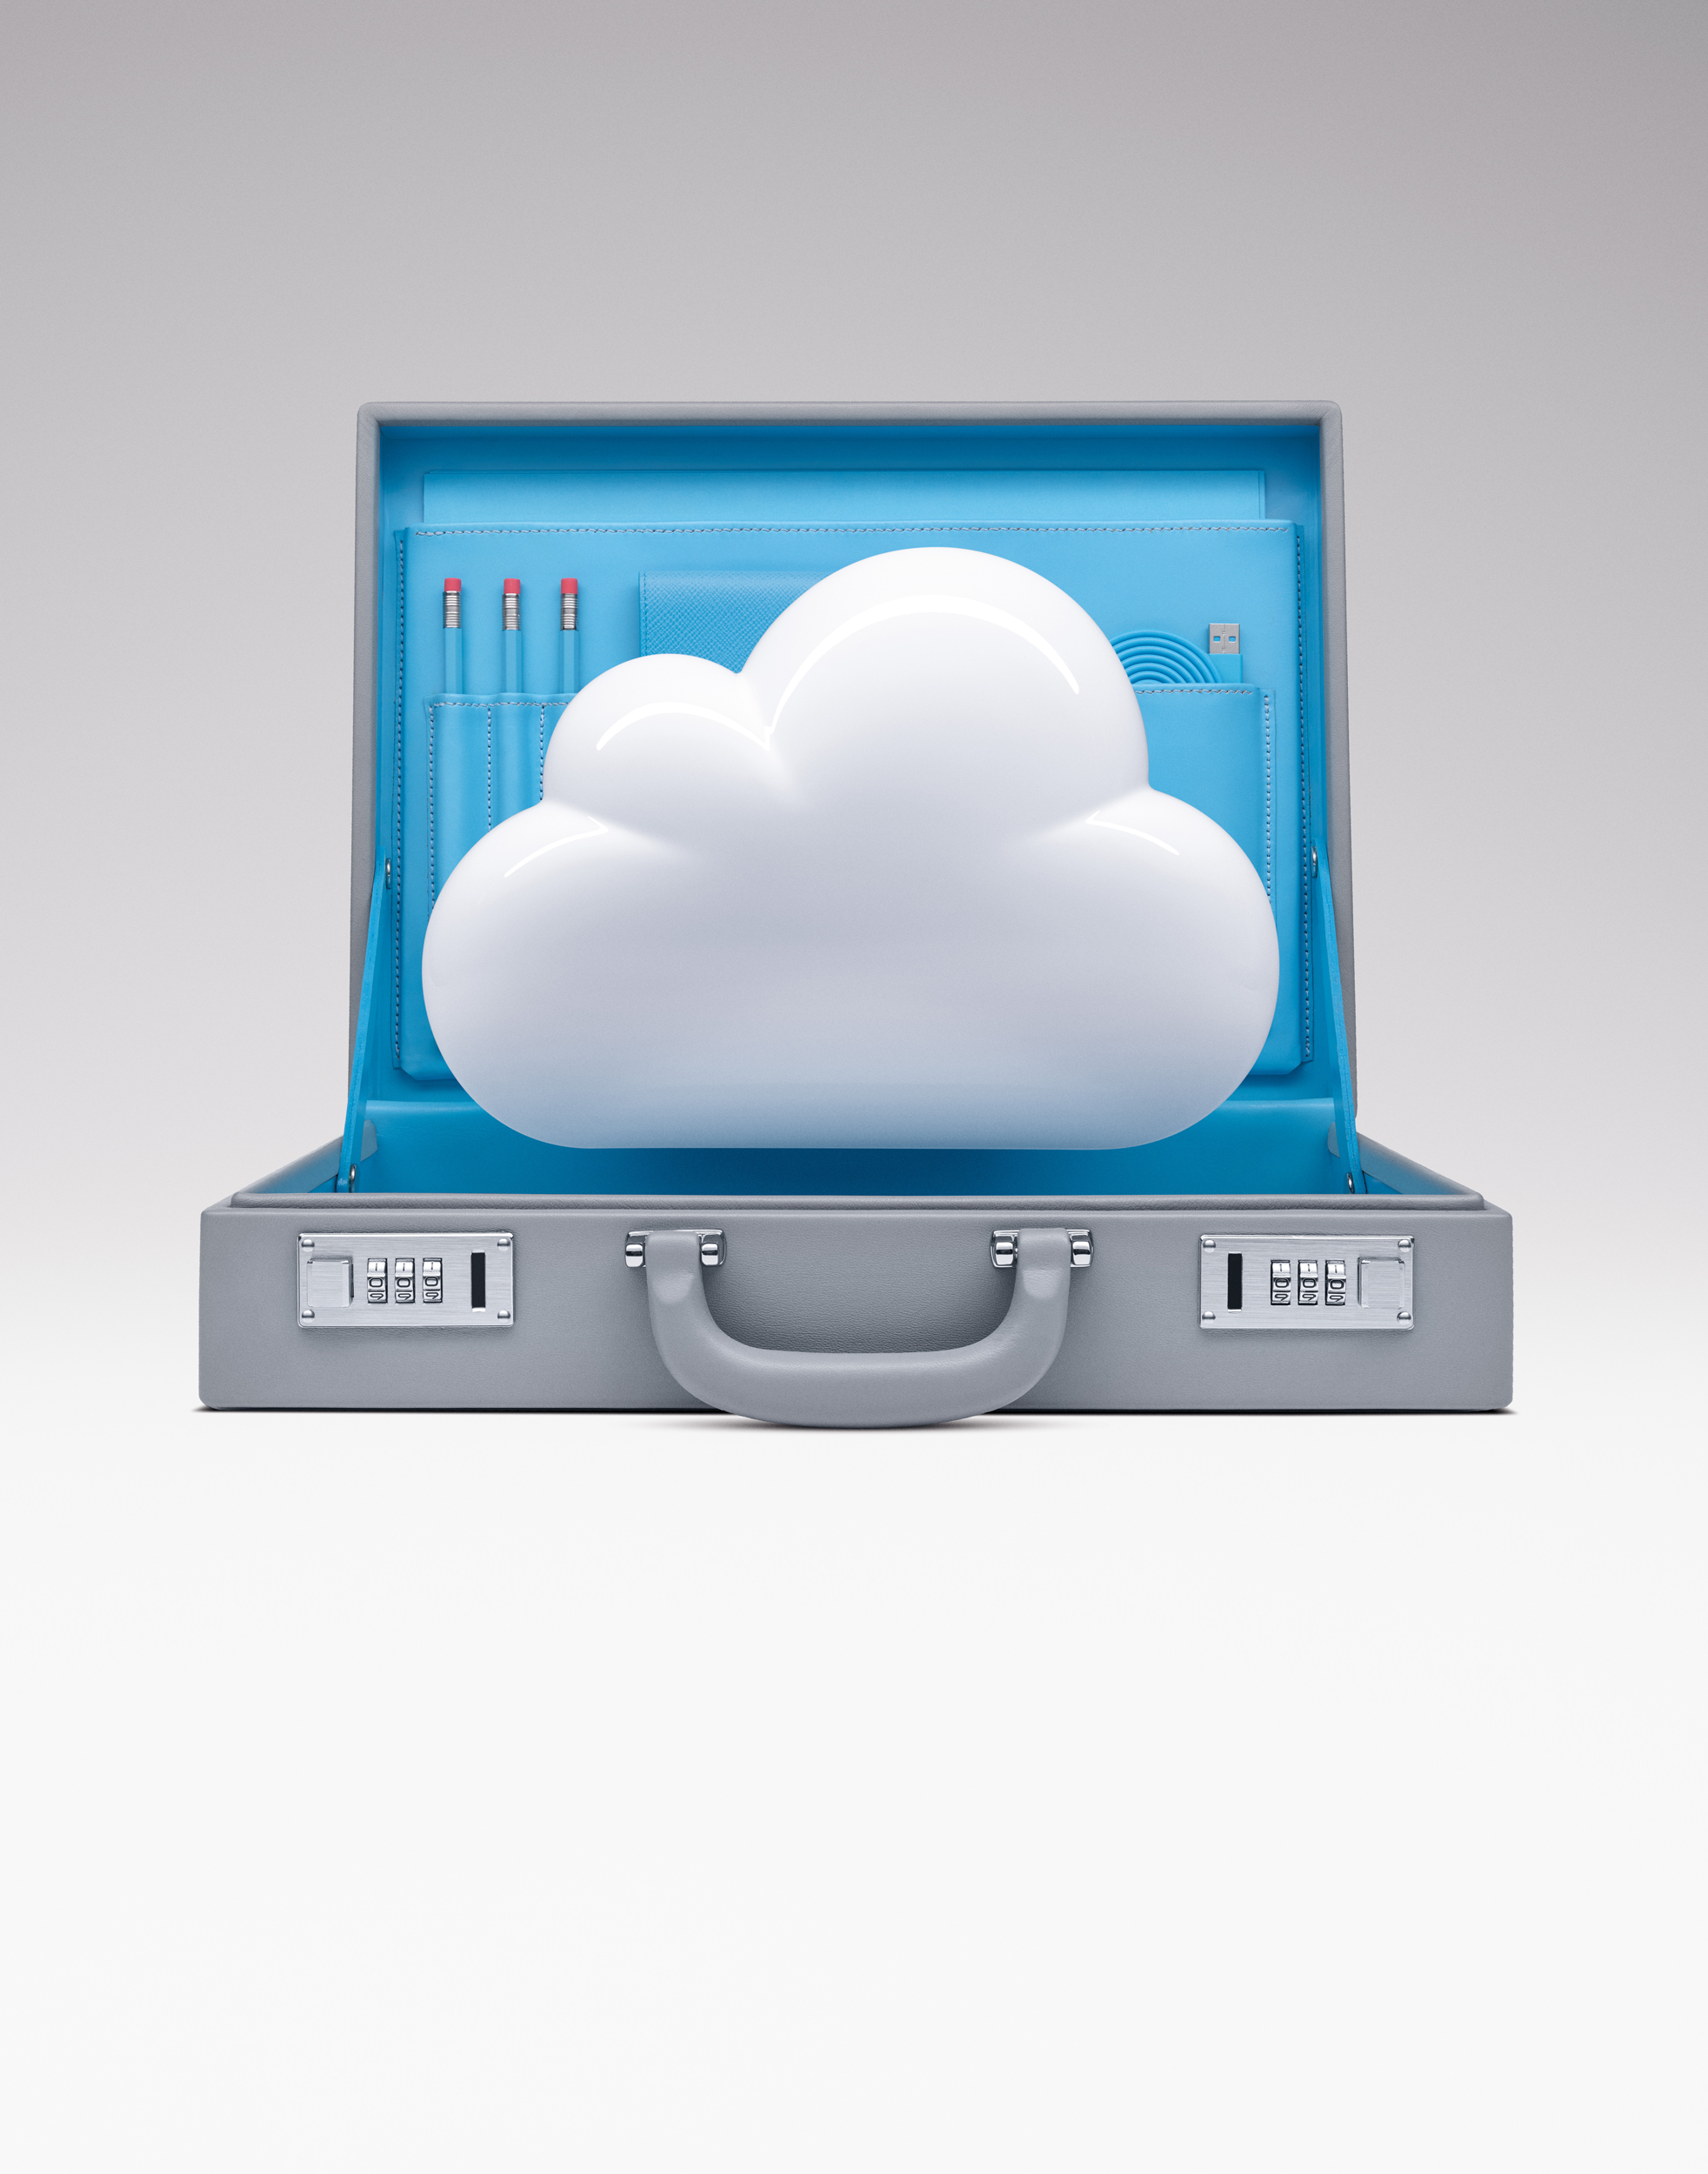 Internet cloud emerging from briefcase by Alexander Kent London based still life and product photographer.